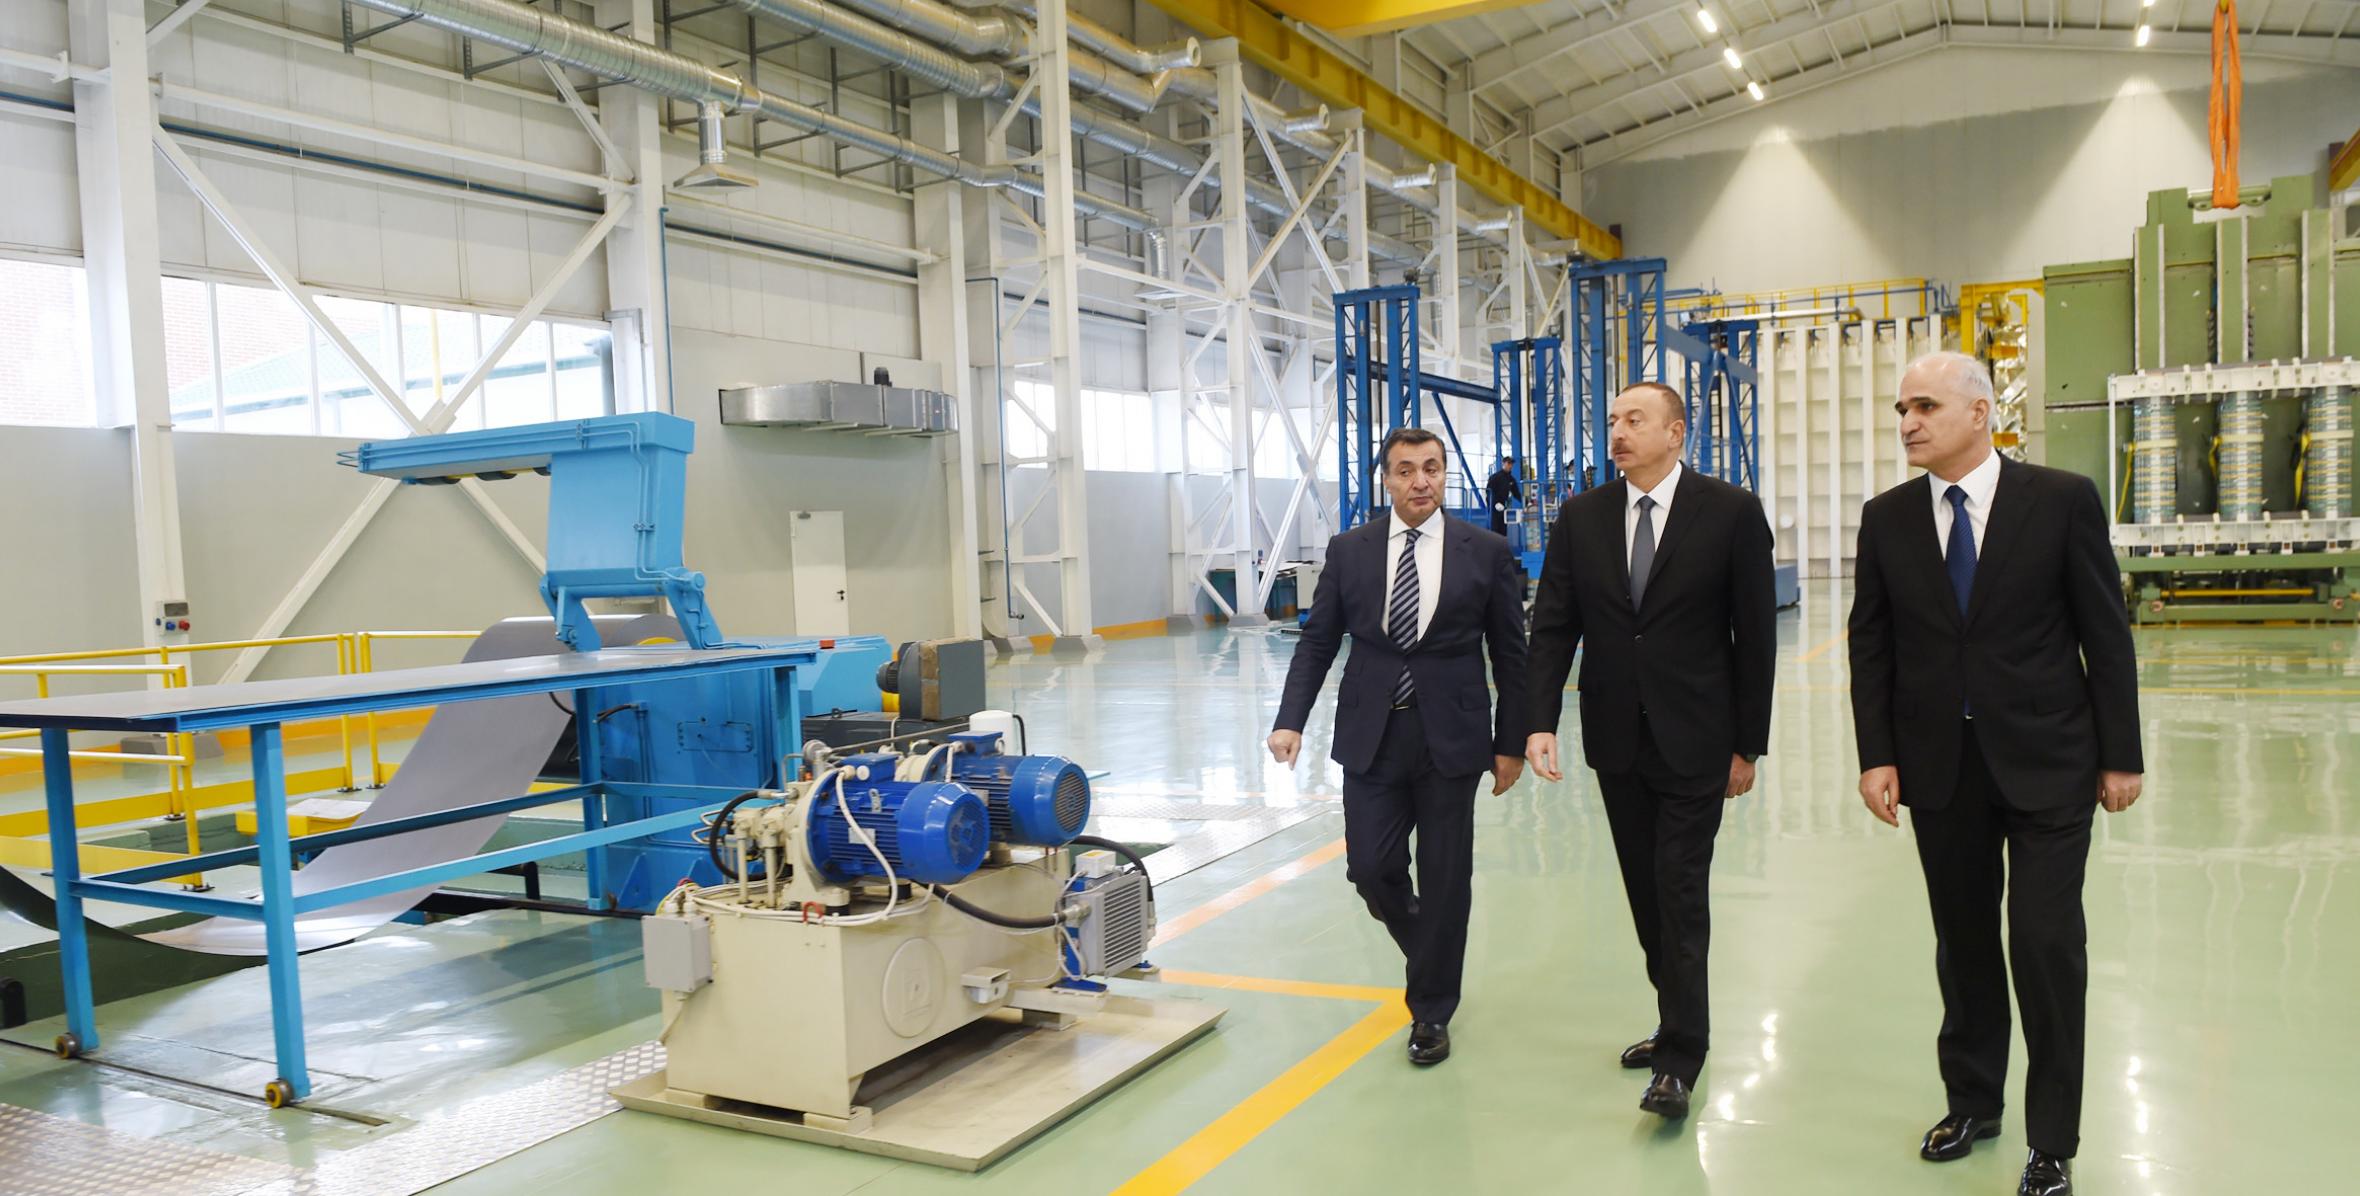 Ilham Aliyev attended the opening of a large-size transformer plant, and laid a foundation stone for a new enterprise